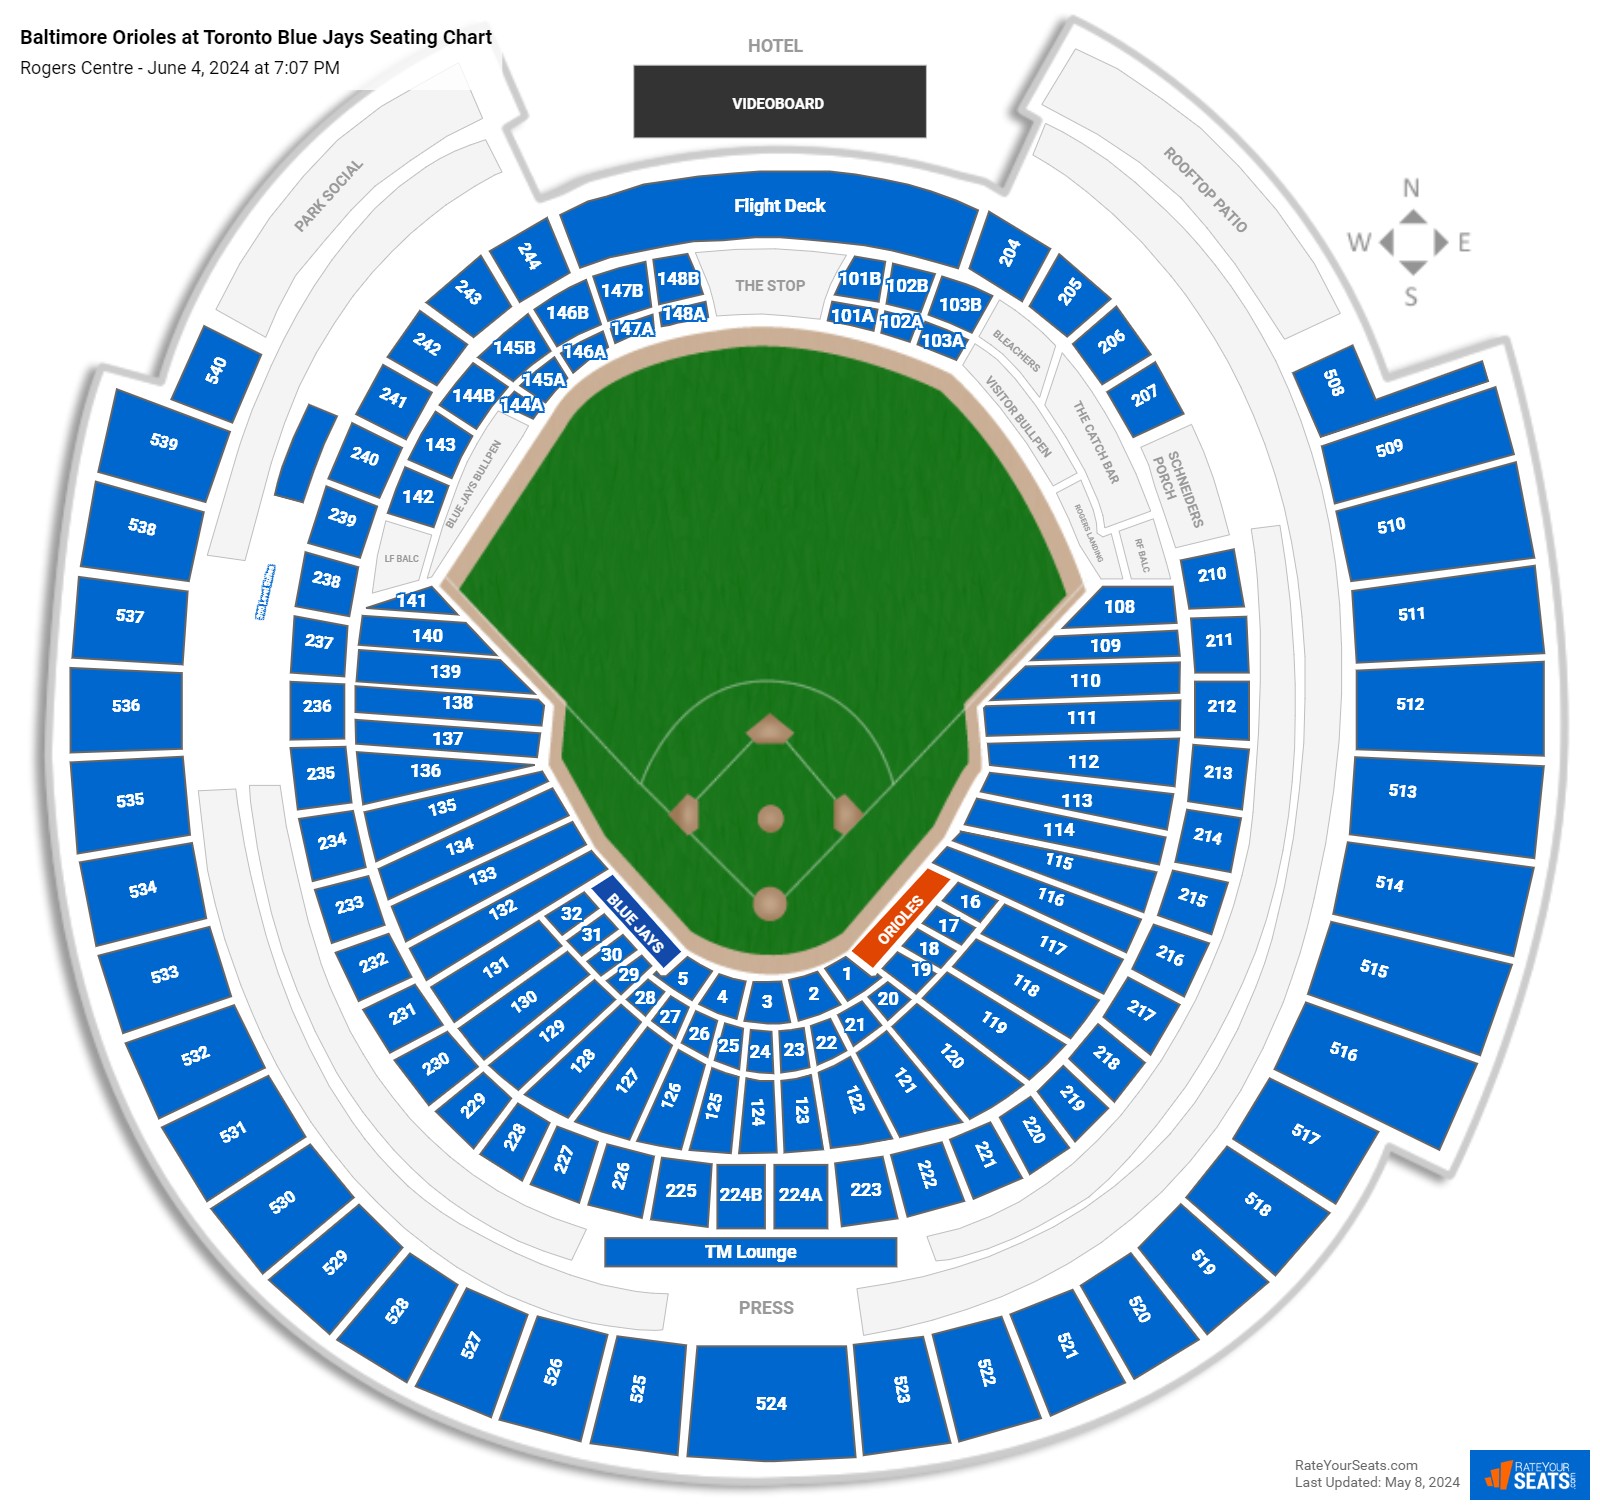 Baltimore Orioles at Toronto Blue Jays seating chart Rogers Centre